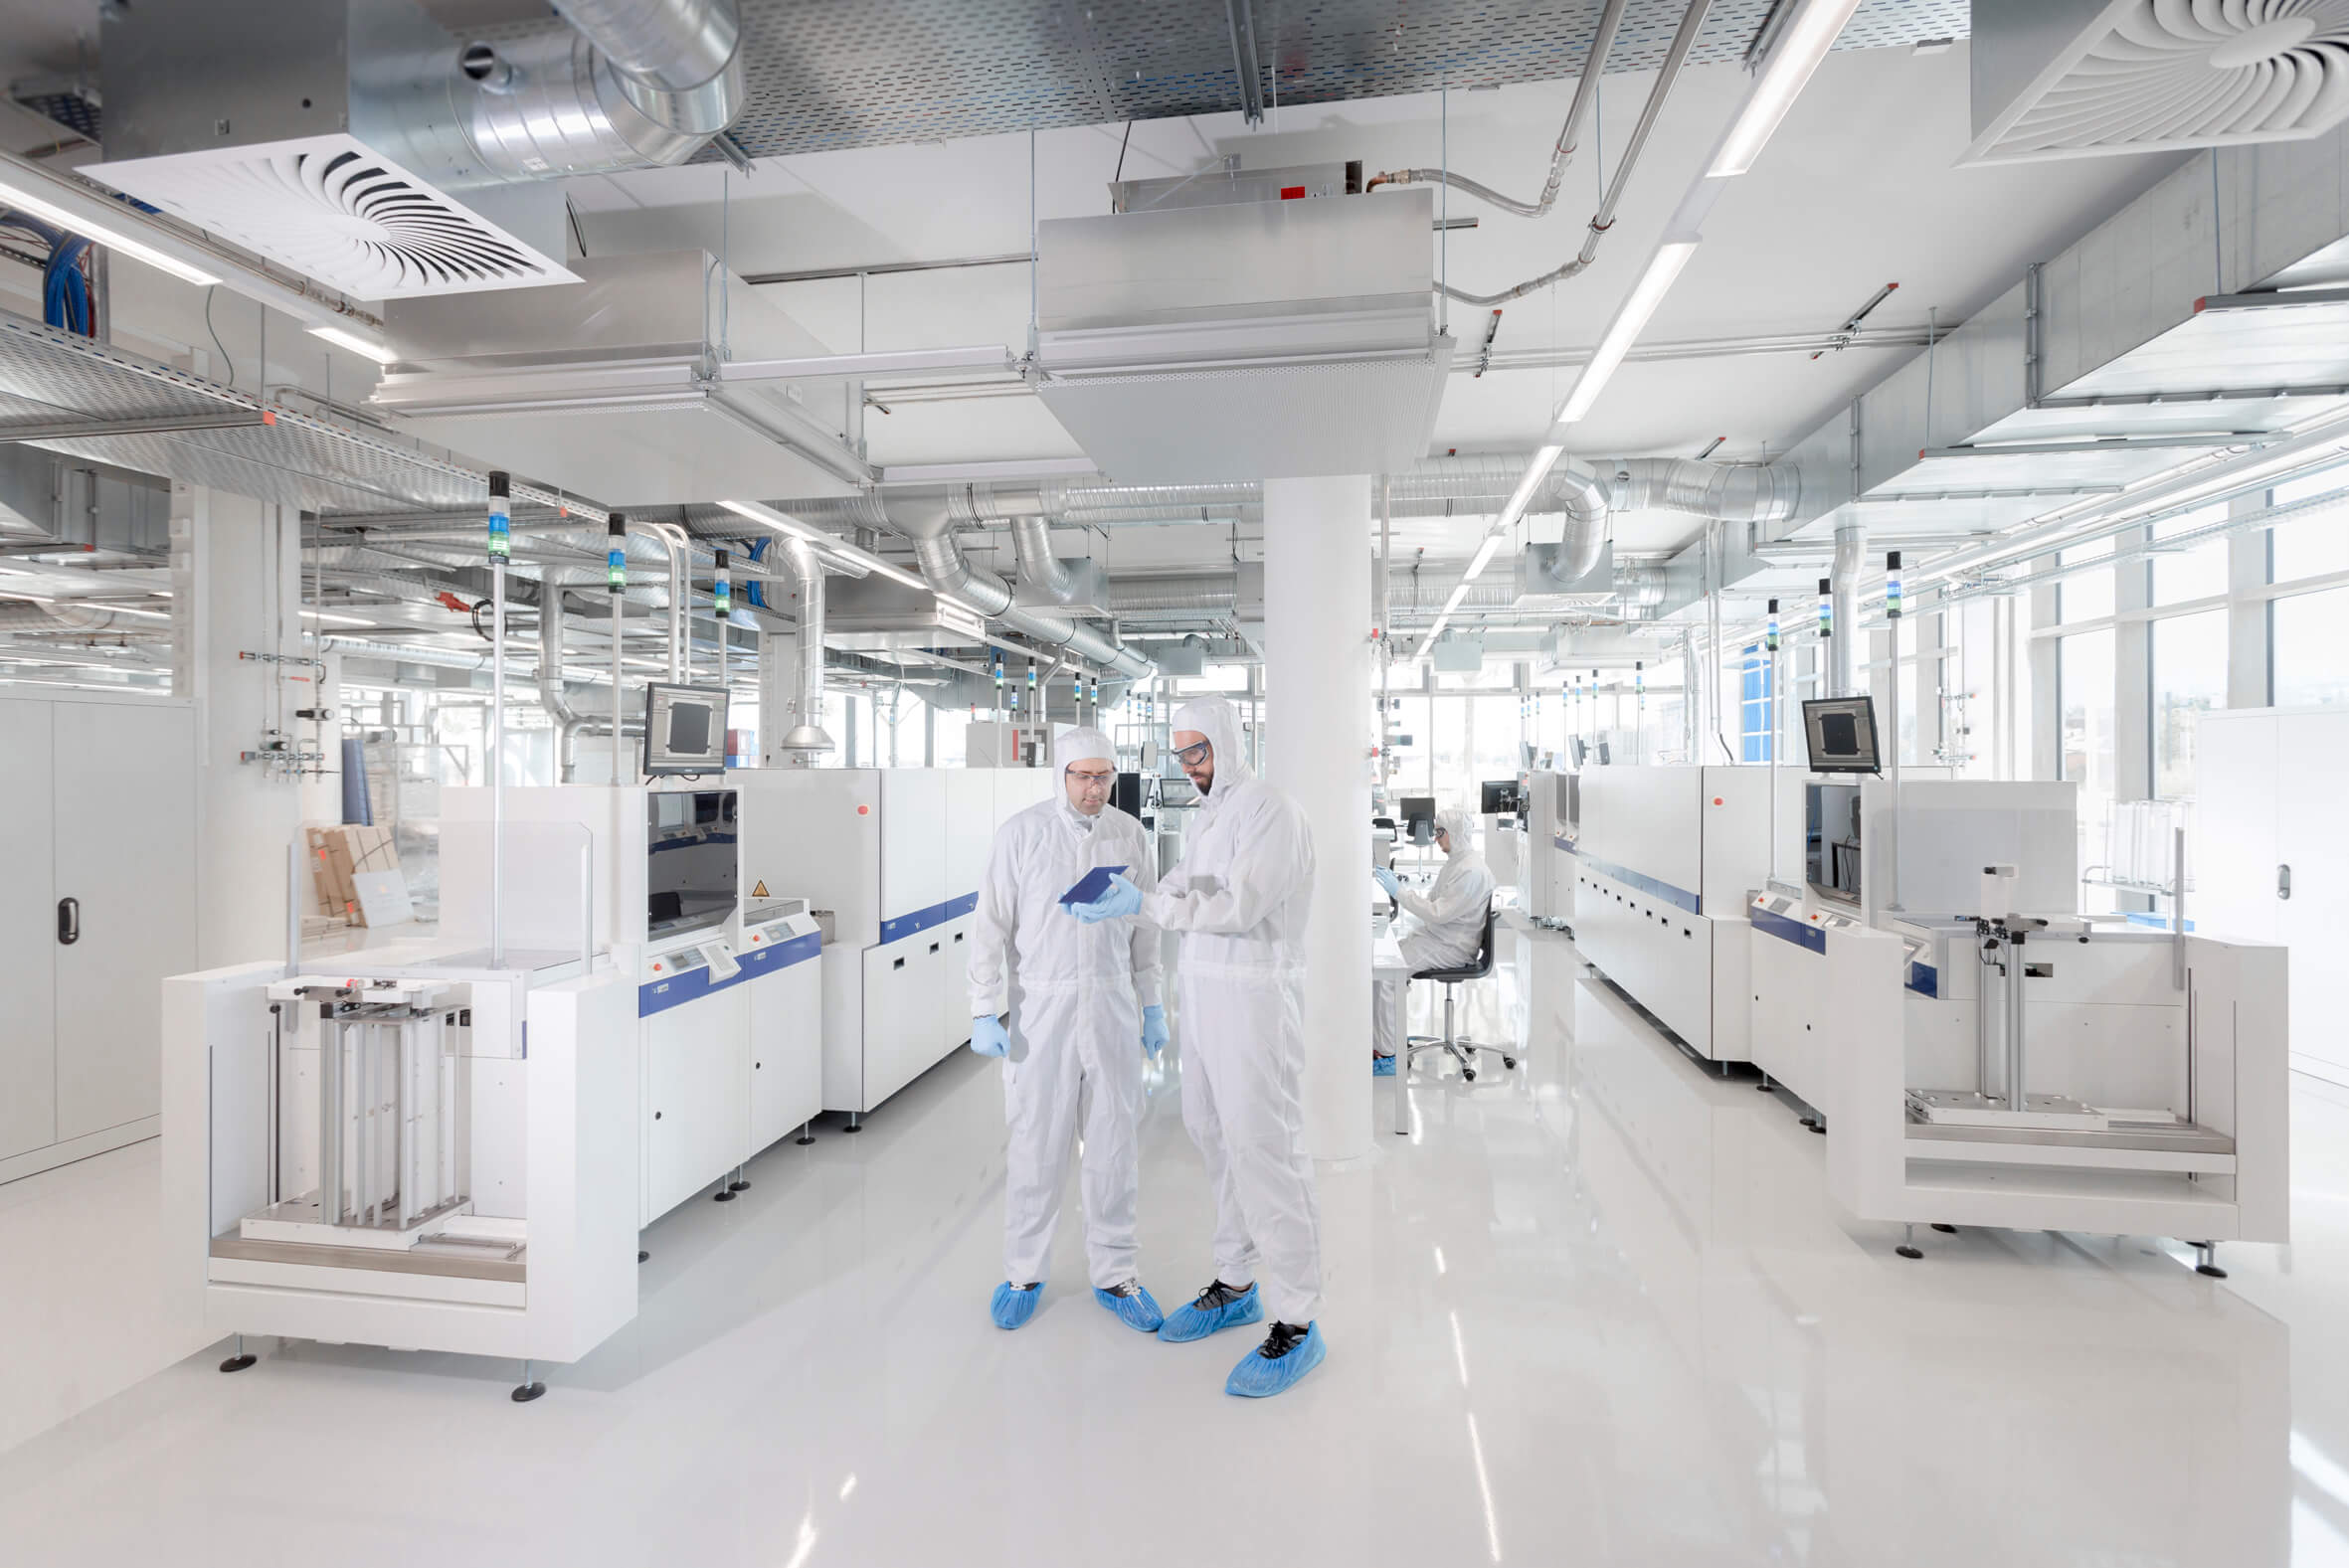 Fraunhofer ISE’s Photovoltaic Technology Evaluation Center